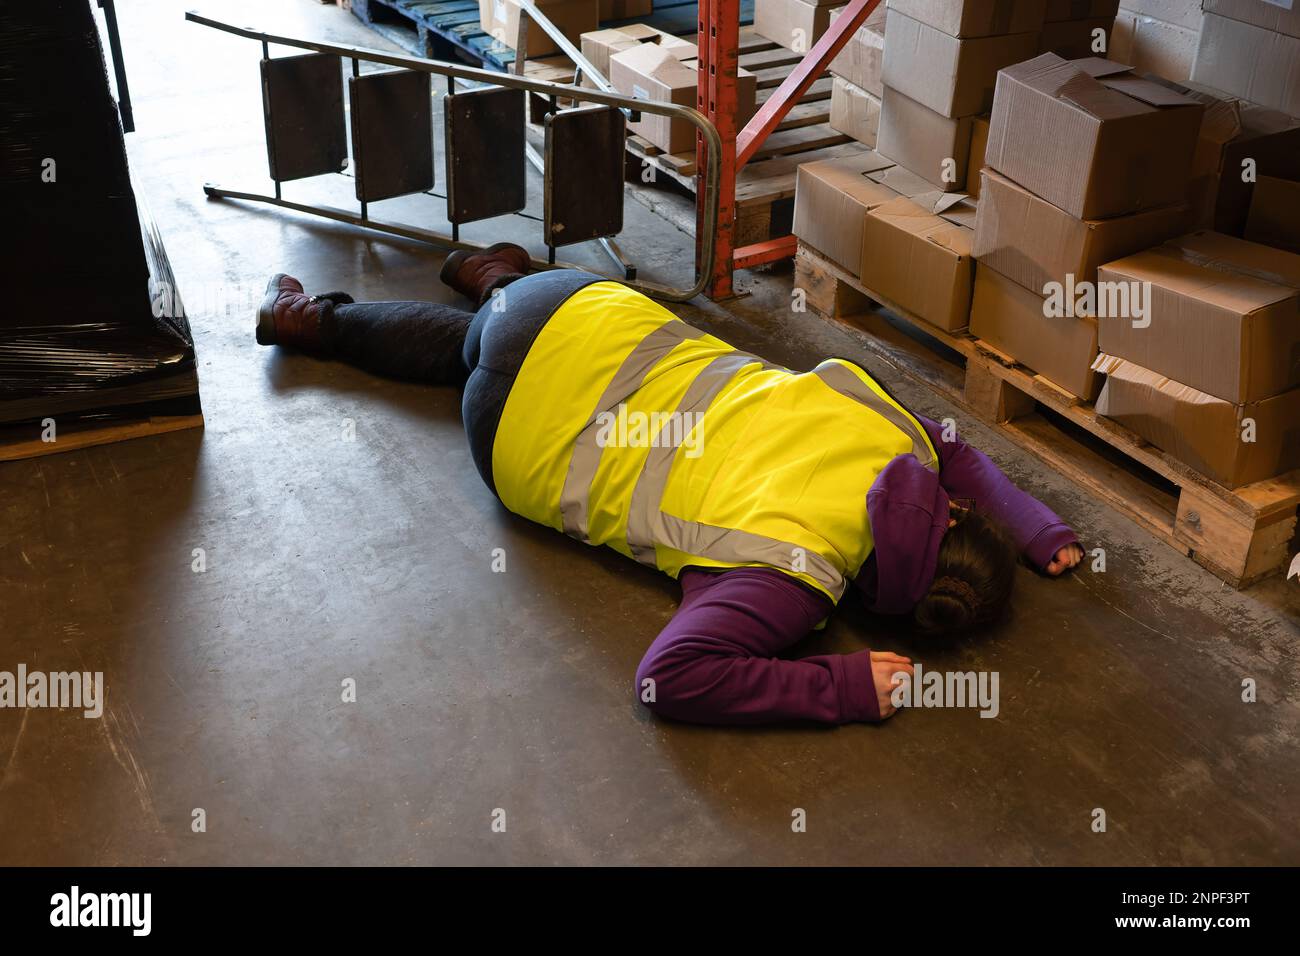 Accident in the work place, young woman lies injured after falling from step ladder onto the factory floor Stock Photo